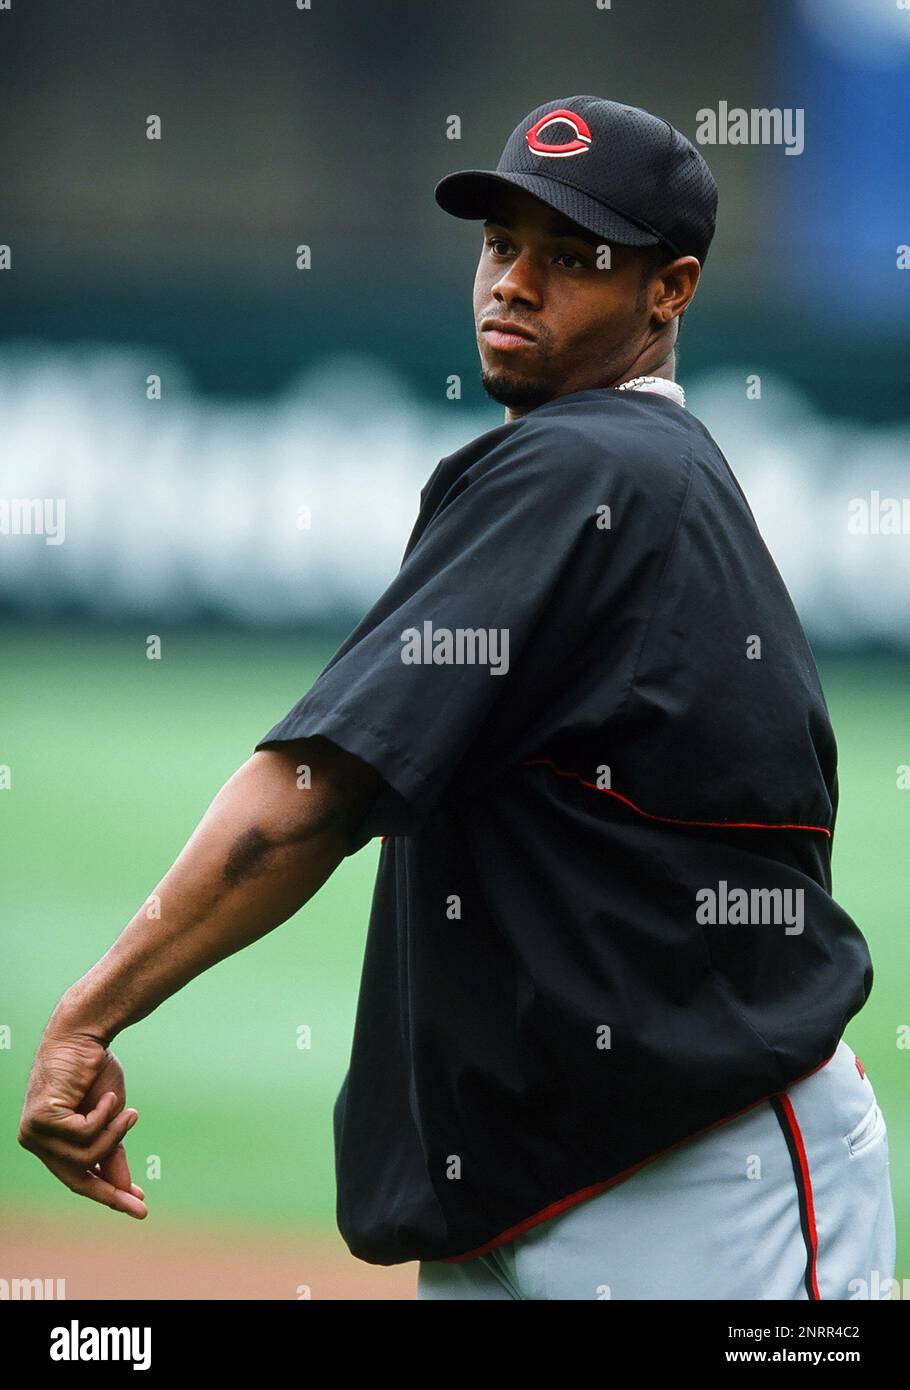 08 Jun. 2002: Cincinnati Reds outfielder Ken Griffey Jr. (30) on the field  during batting practice before a game against the Anaheim Angels played on  June 8, 2002 at Edison International Field